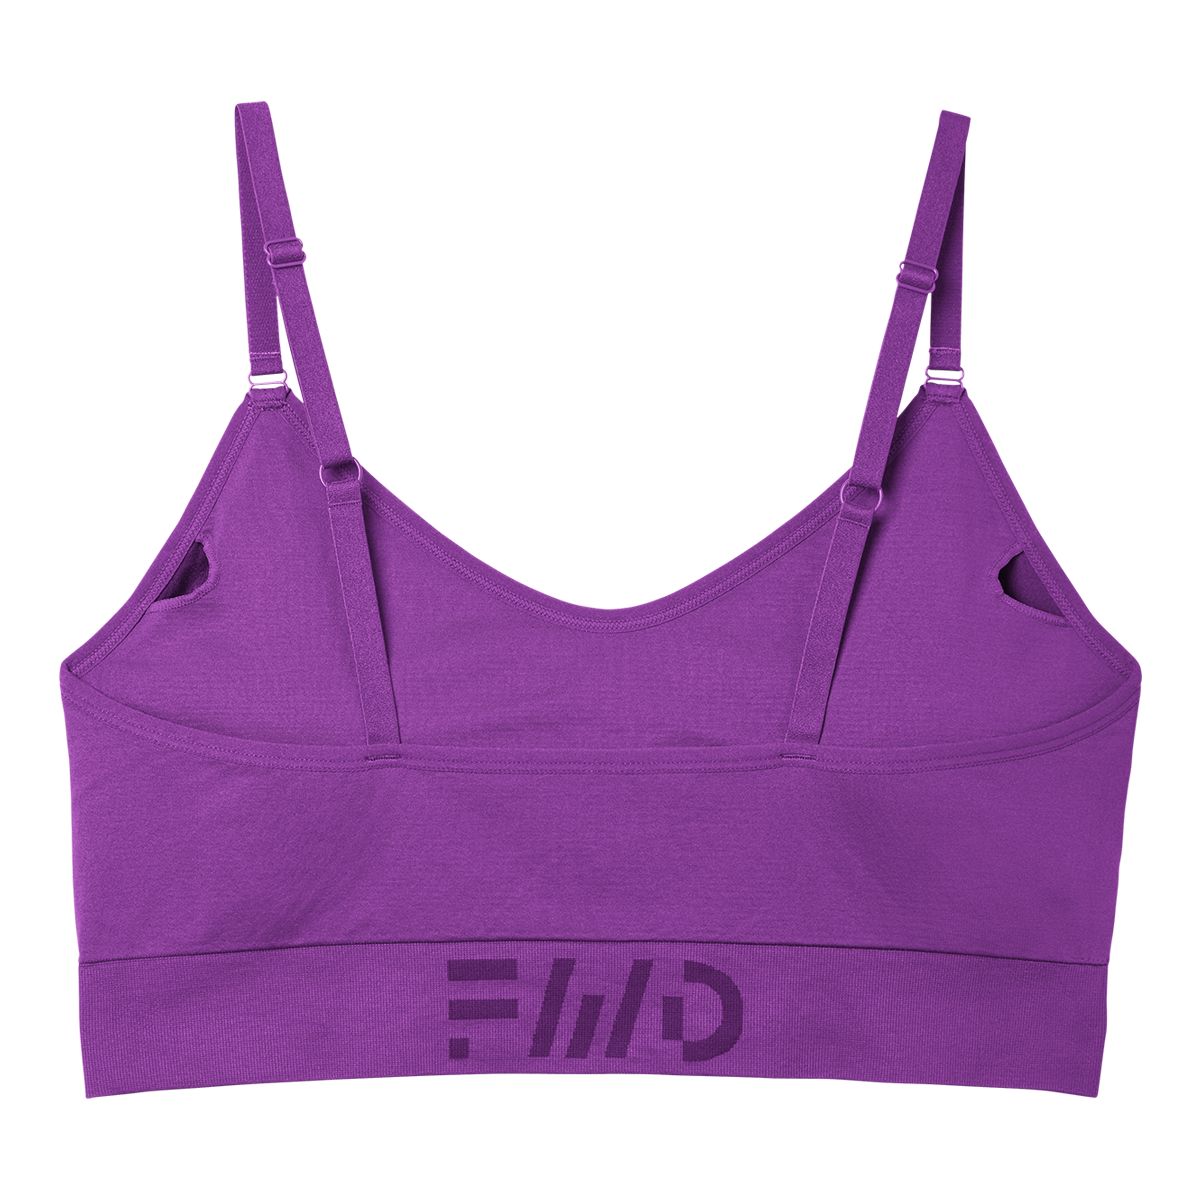 Nike Women's Indy V-Neck Plus Size Sports Bra, Low Impact, Removable Pads